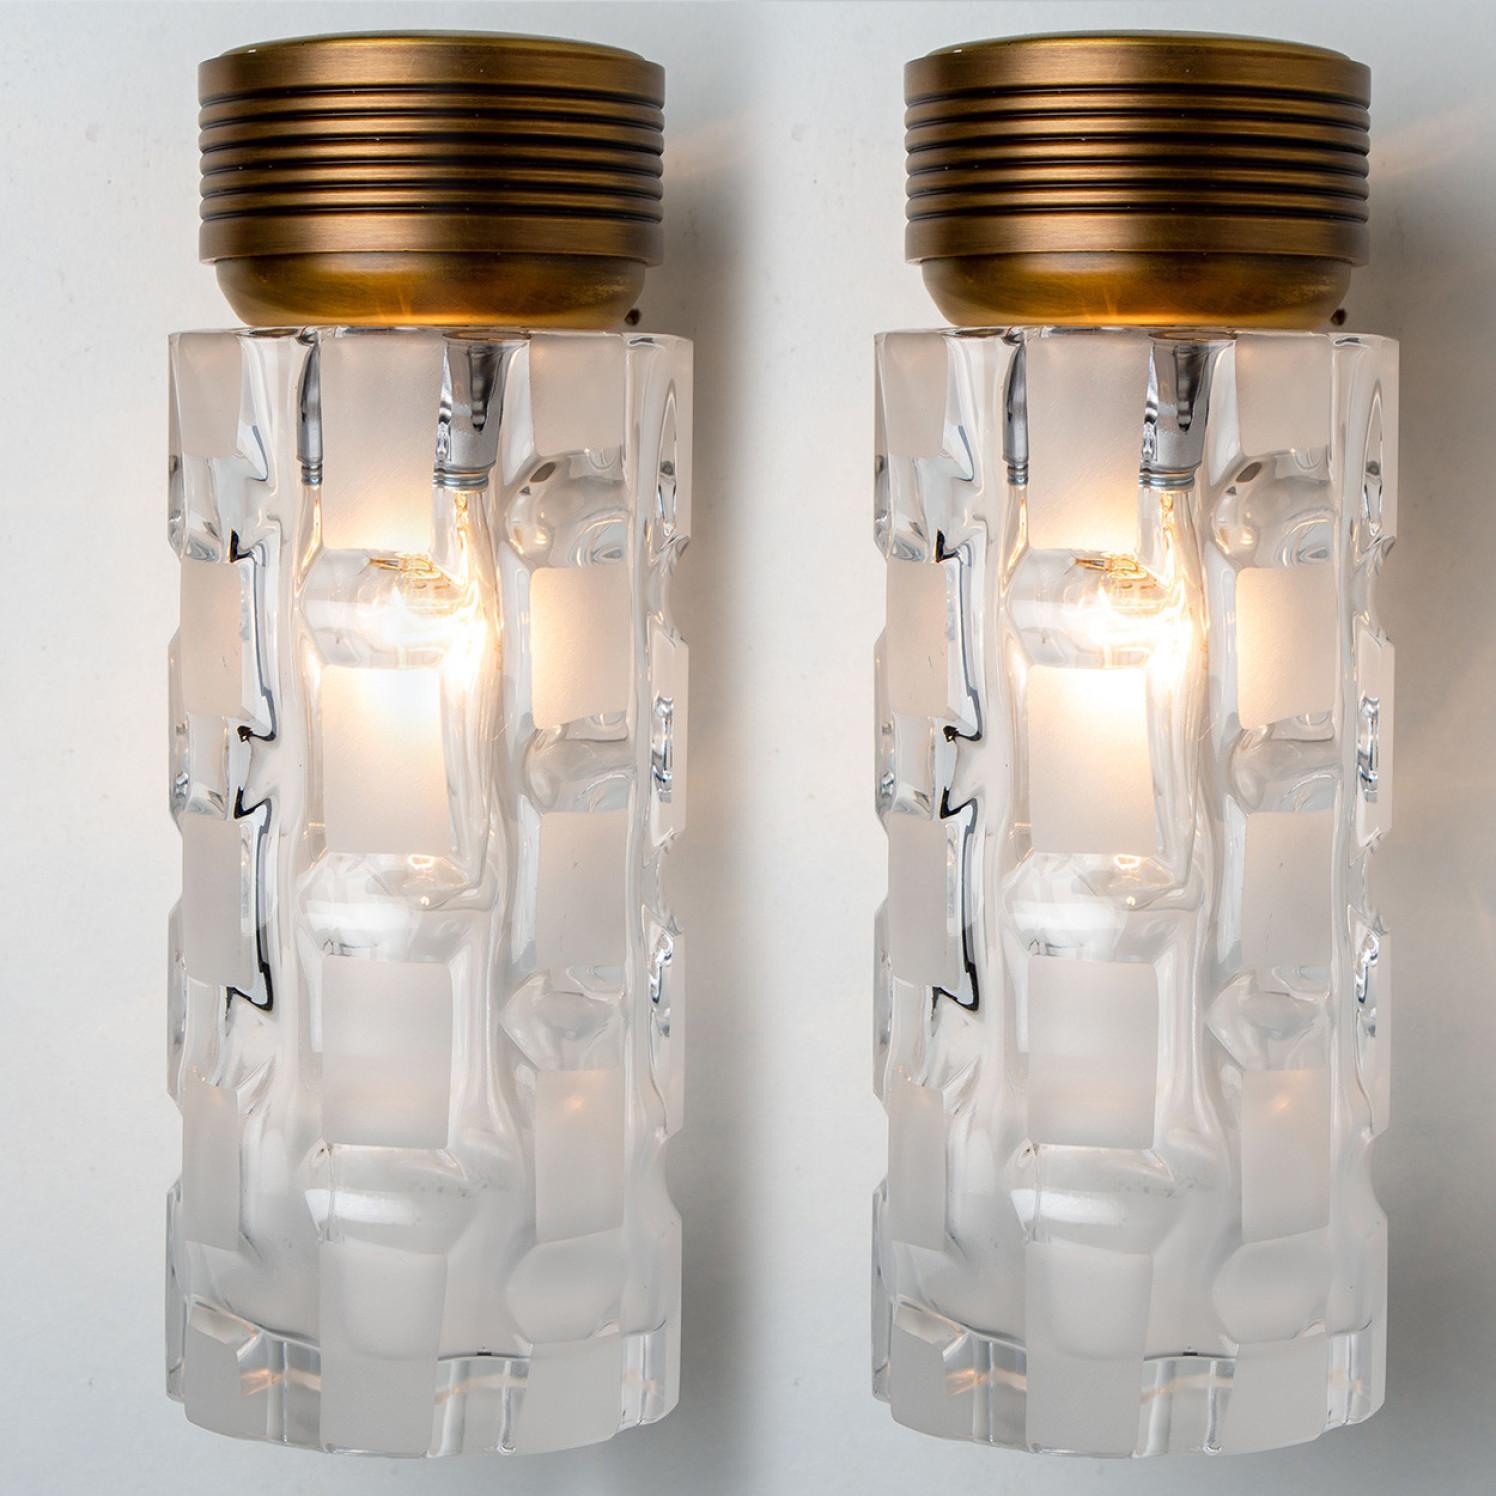 Pair Of Hillebrand Clear and Opaque Glass Wall Light Fixtures, 1970s For Sale 1